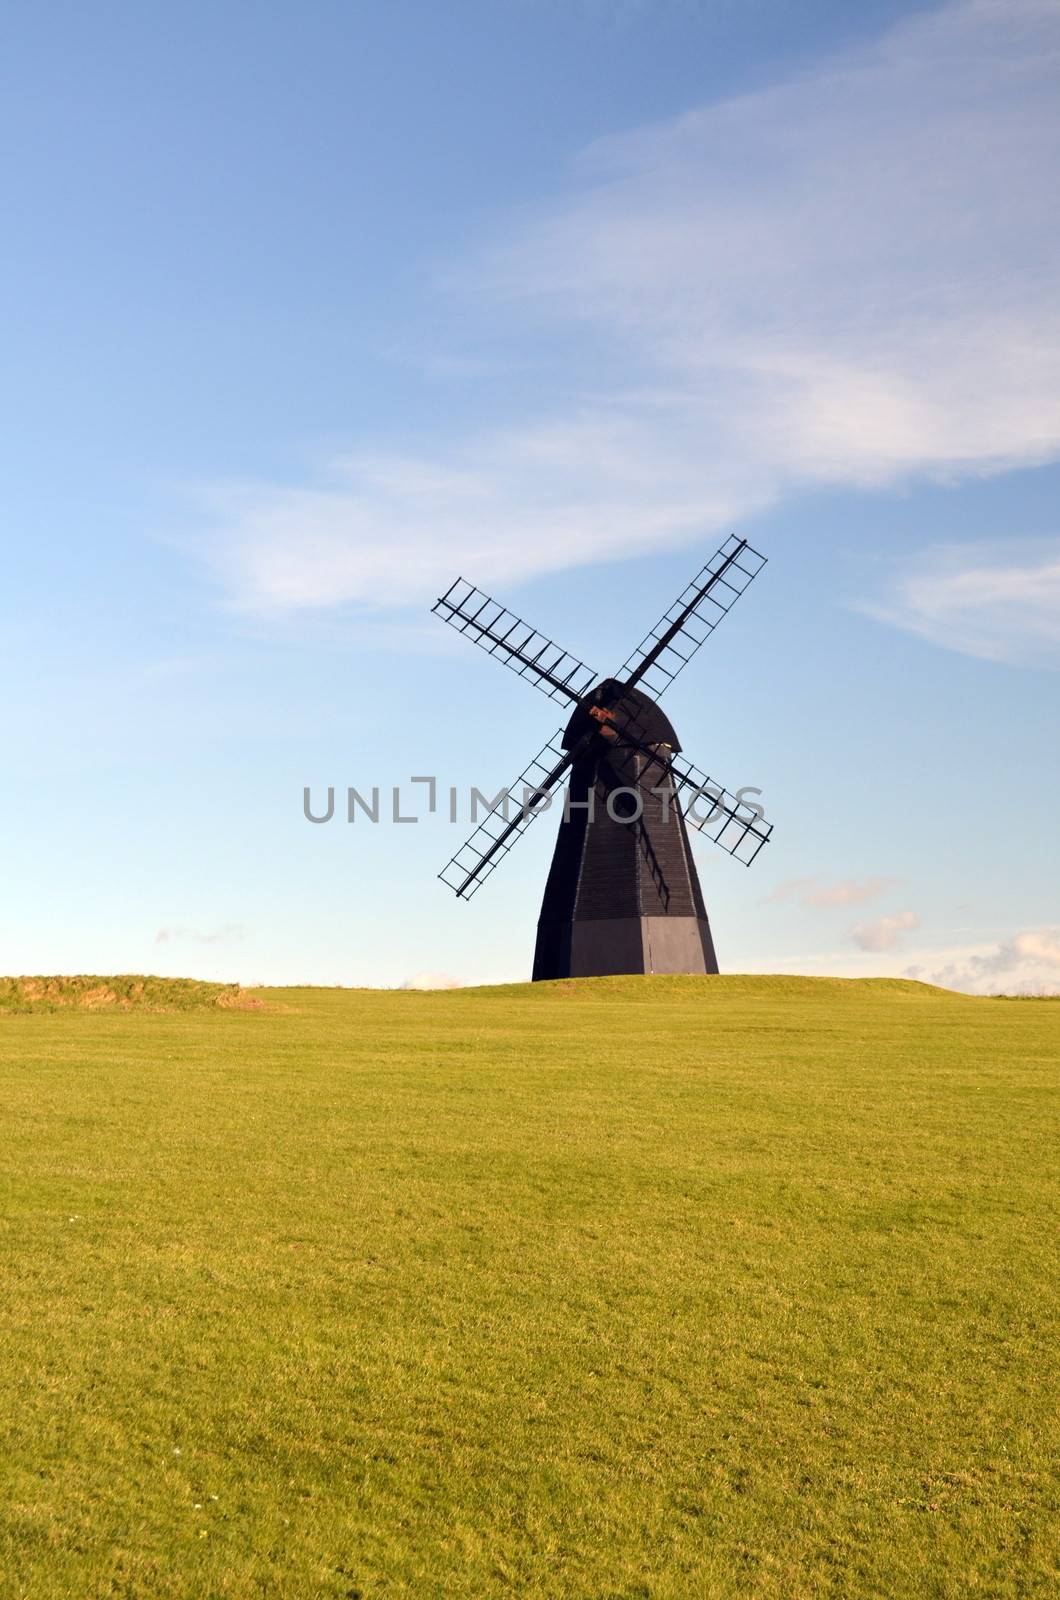 Rottingdean windmill near Brighton,Sussex,England.Built in 1802 and now fully restored.